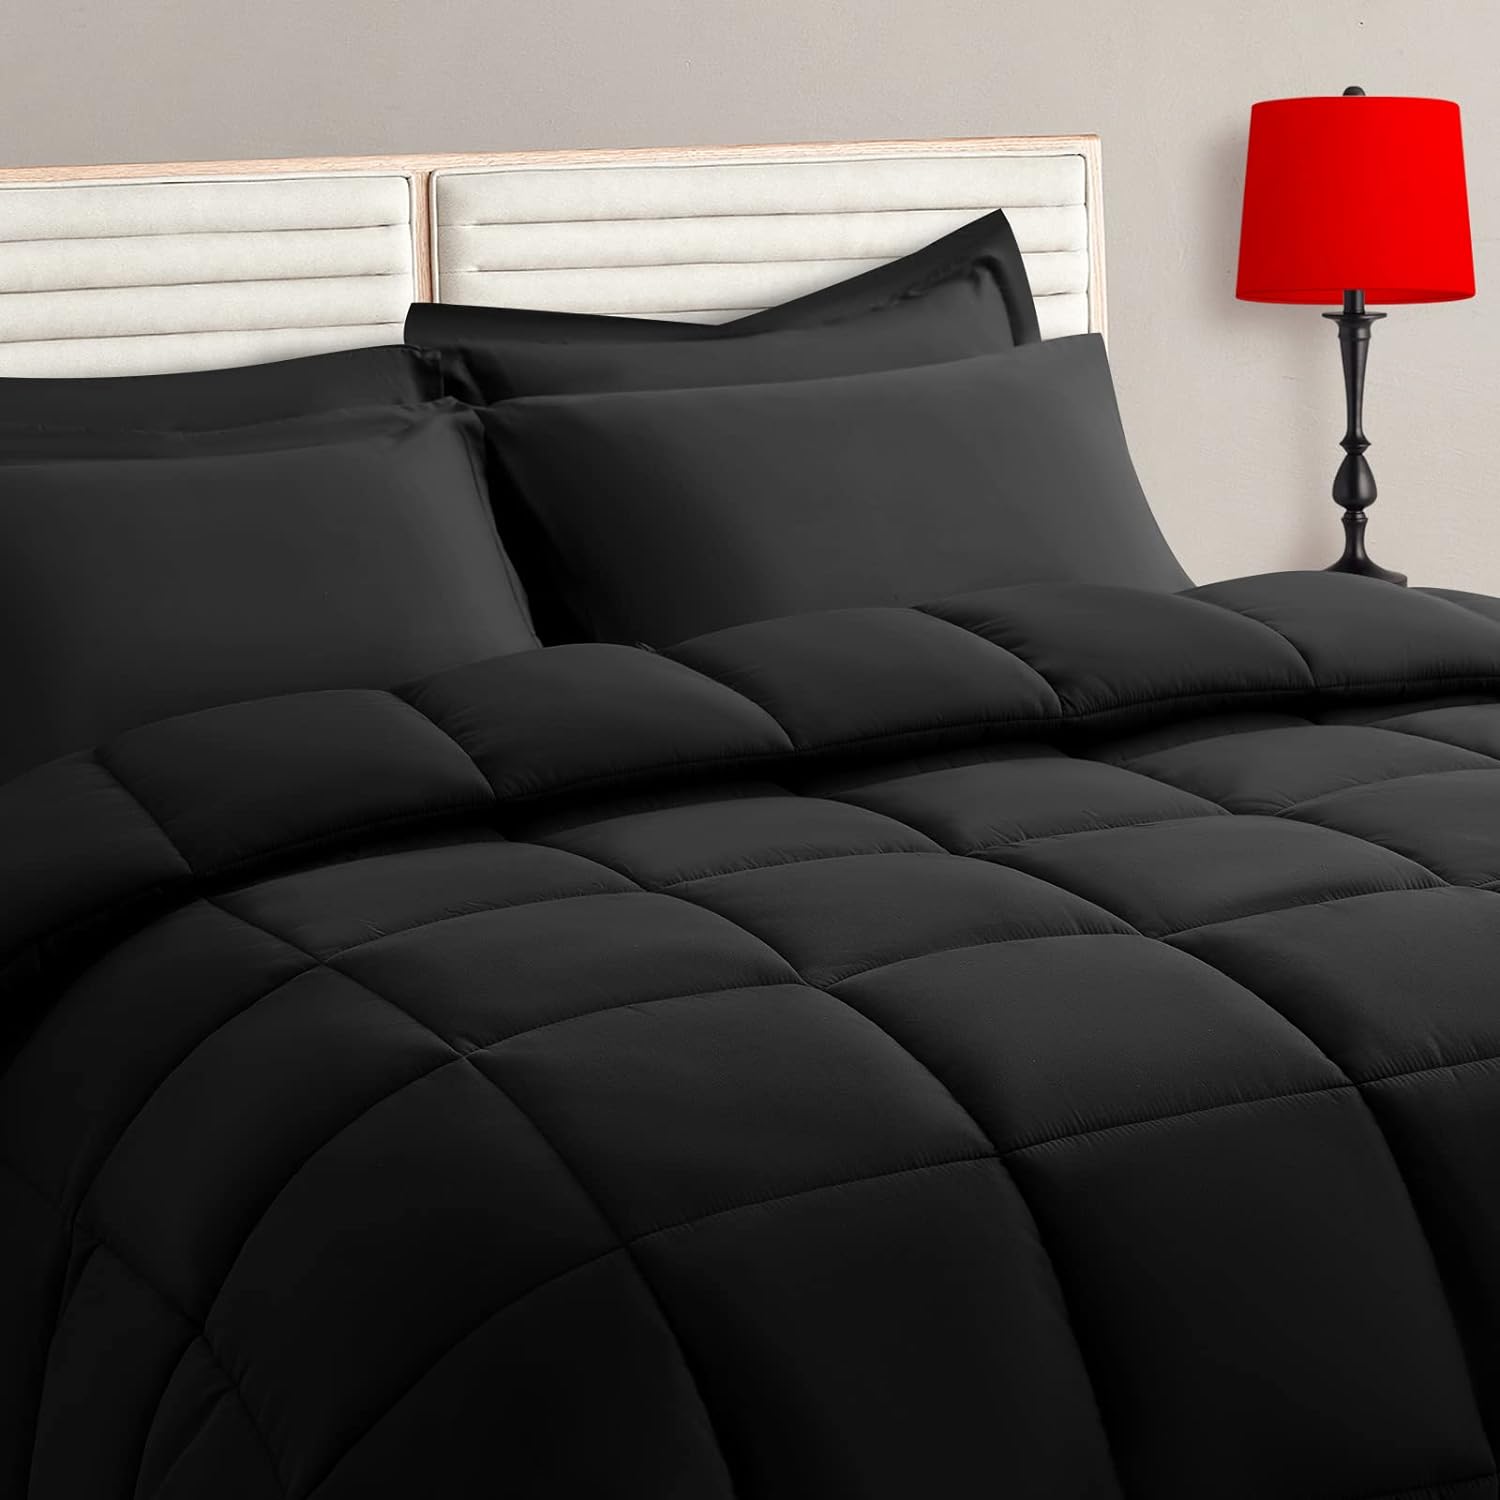 Limited Offer - 40% Off TAIMIT Black Full Size Comforter Set - 7 Pieces